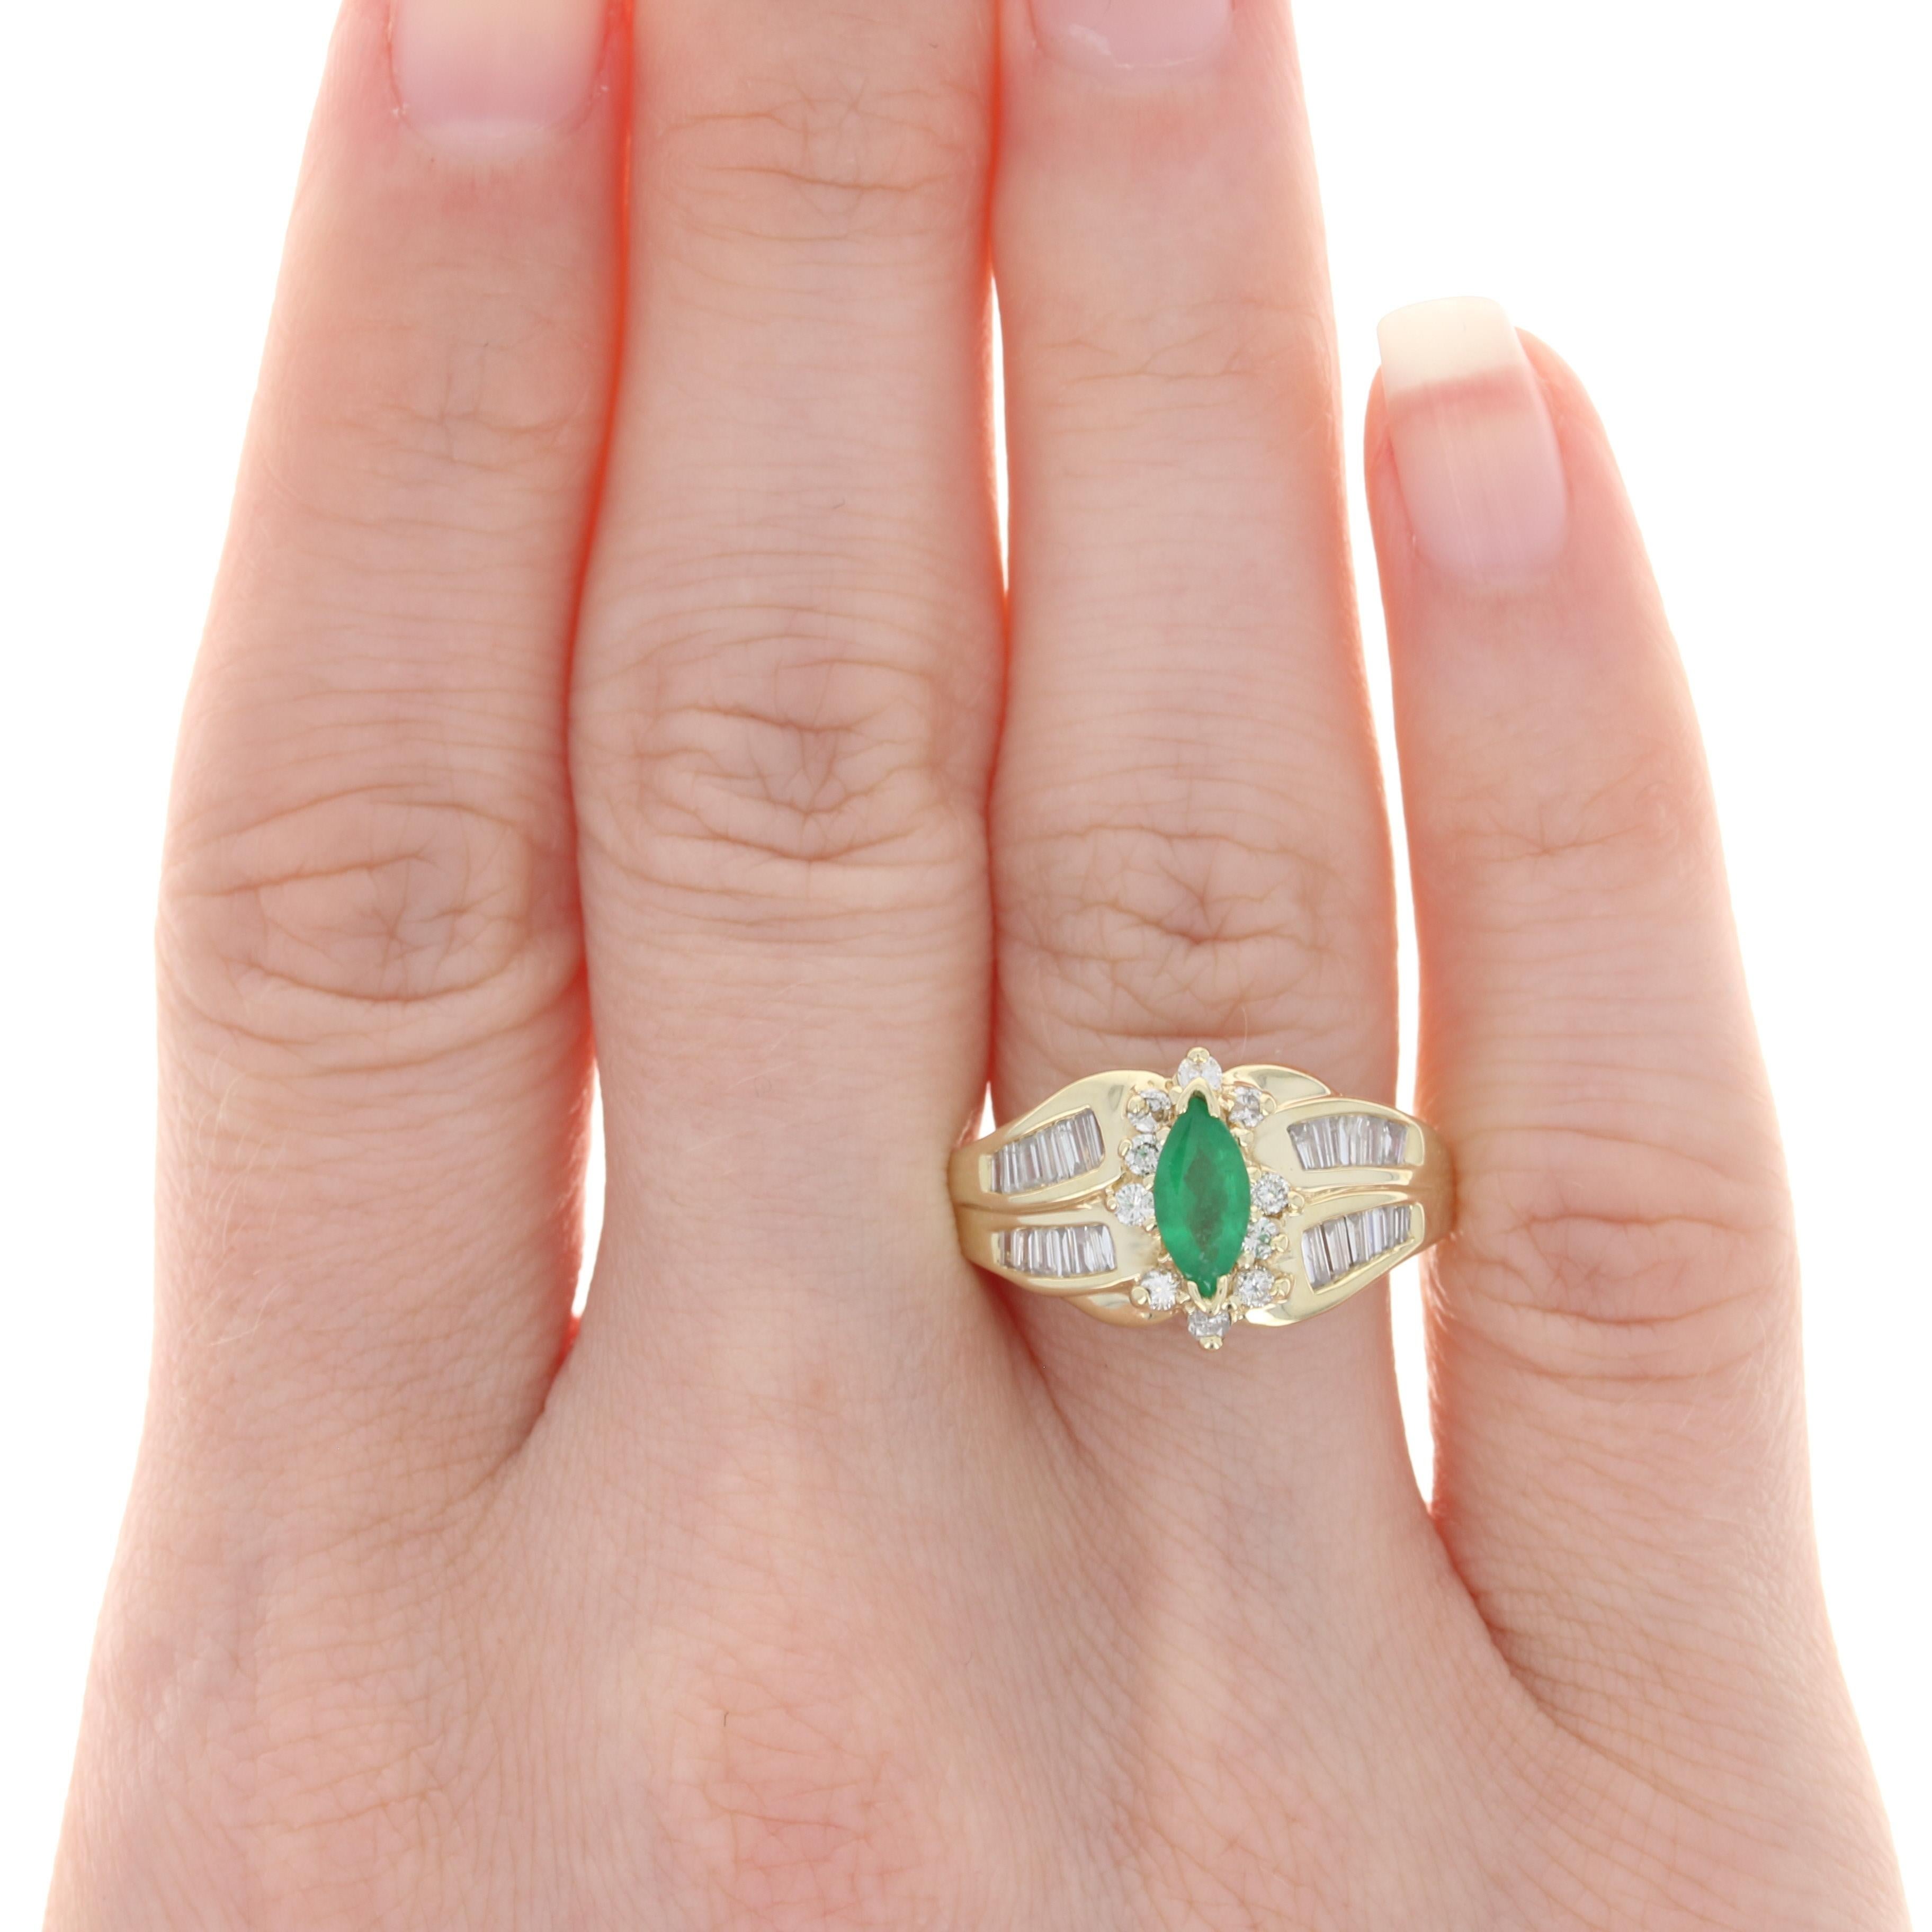 Size: 5 1/2
Sizing Fee: Up 2 sizes or Down 1 size for $30

Metal Content: 14k Yellow Gold & 14k White Gold

Stone Information: 
Genuine Emerald
Treatment: Oiling
Carat(s): .60ct
Cut: Marquise
Color: Green

Natural Diamonds
Carat(s): .80ctw
Cuts: